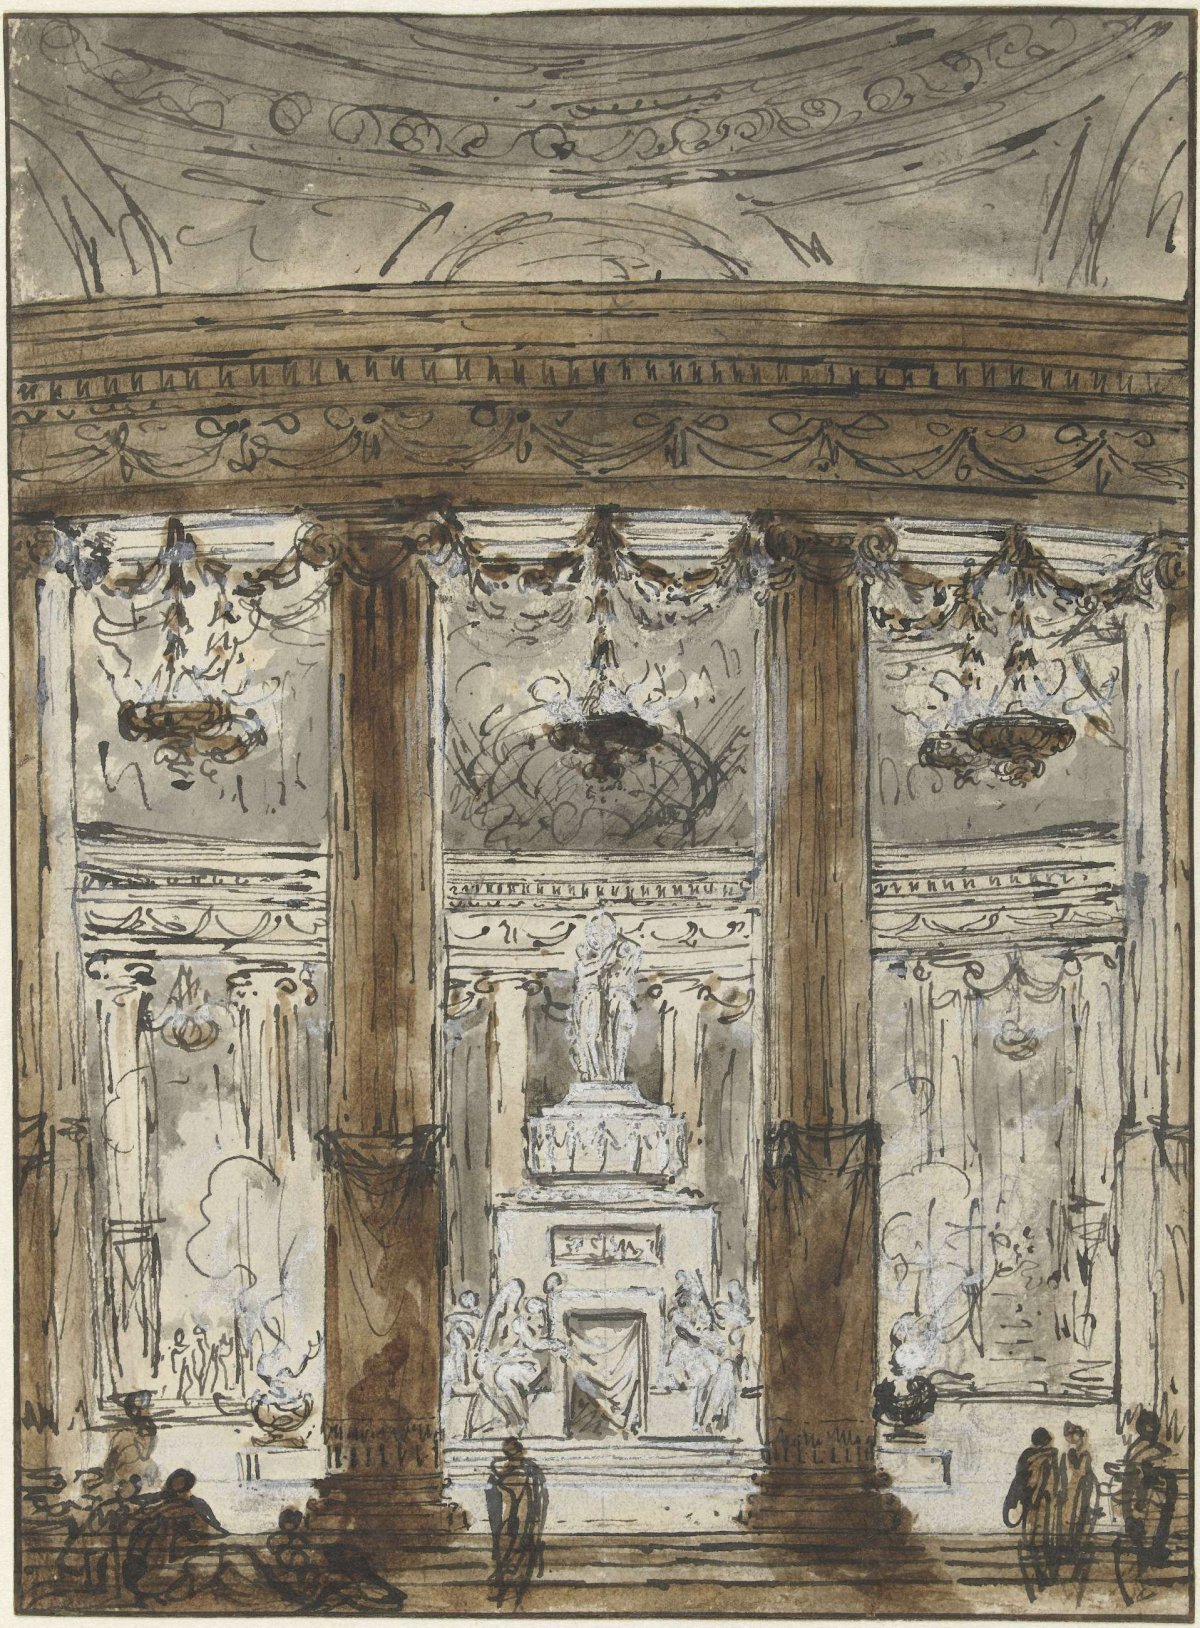 Interior of a Mausoleum, Charles Michel-Ange Challe, 1728 - 1778